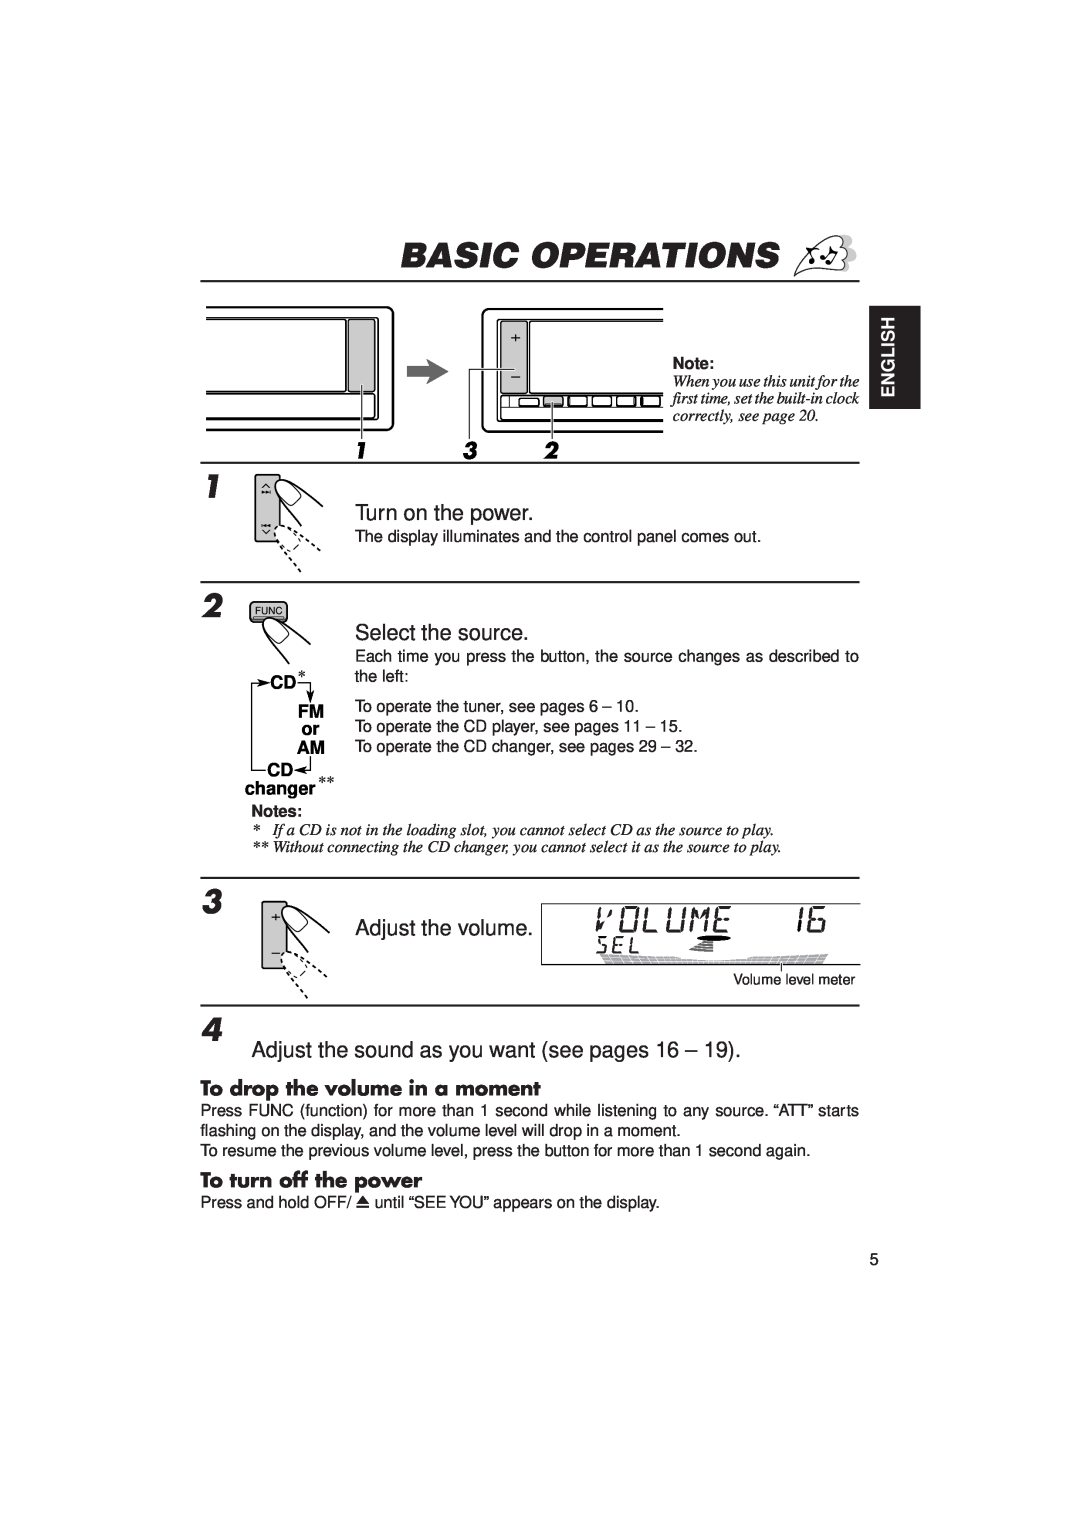 JVC KD-LX1 manual Basic Operations, Turn on the power, Select the source, Adjust the volume, To drop the volume in a moment 